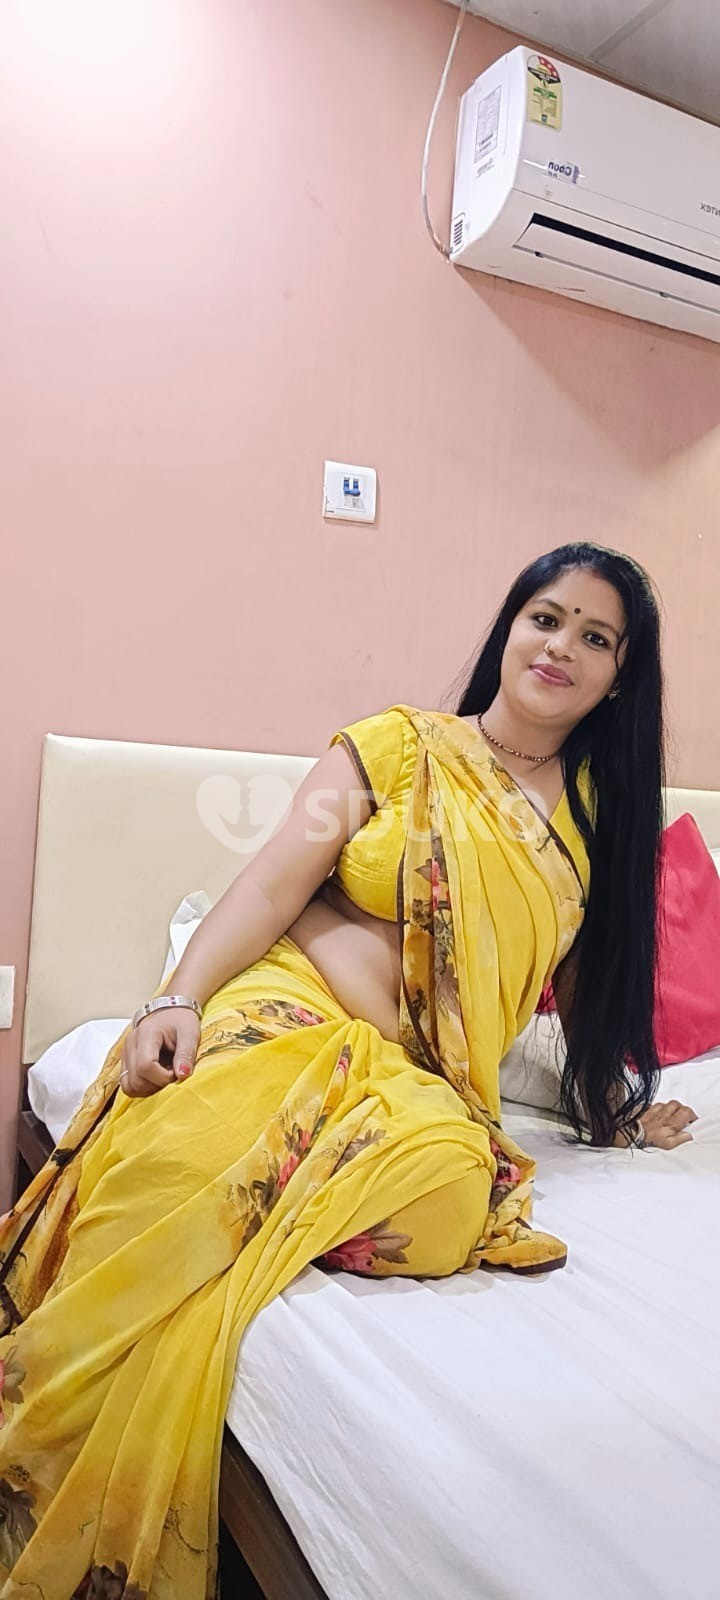 Kanpur college girls and bhabhi aunty available 24 hour available all area available full set and secure service availab